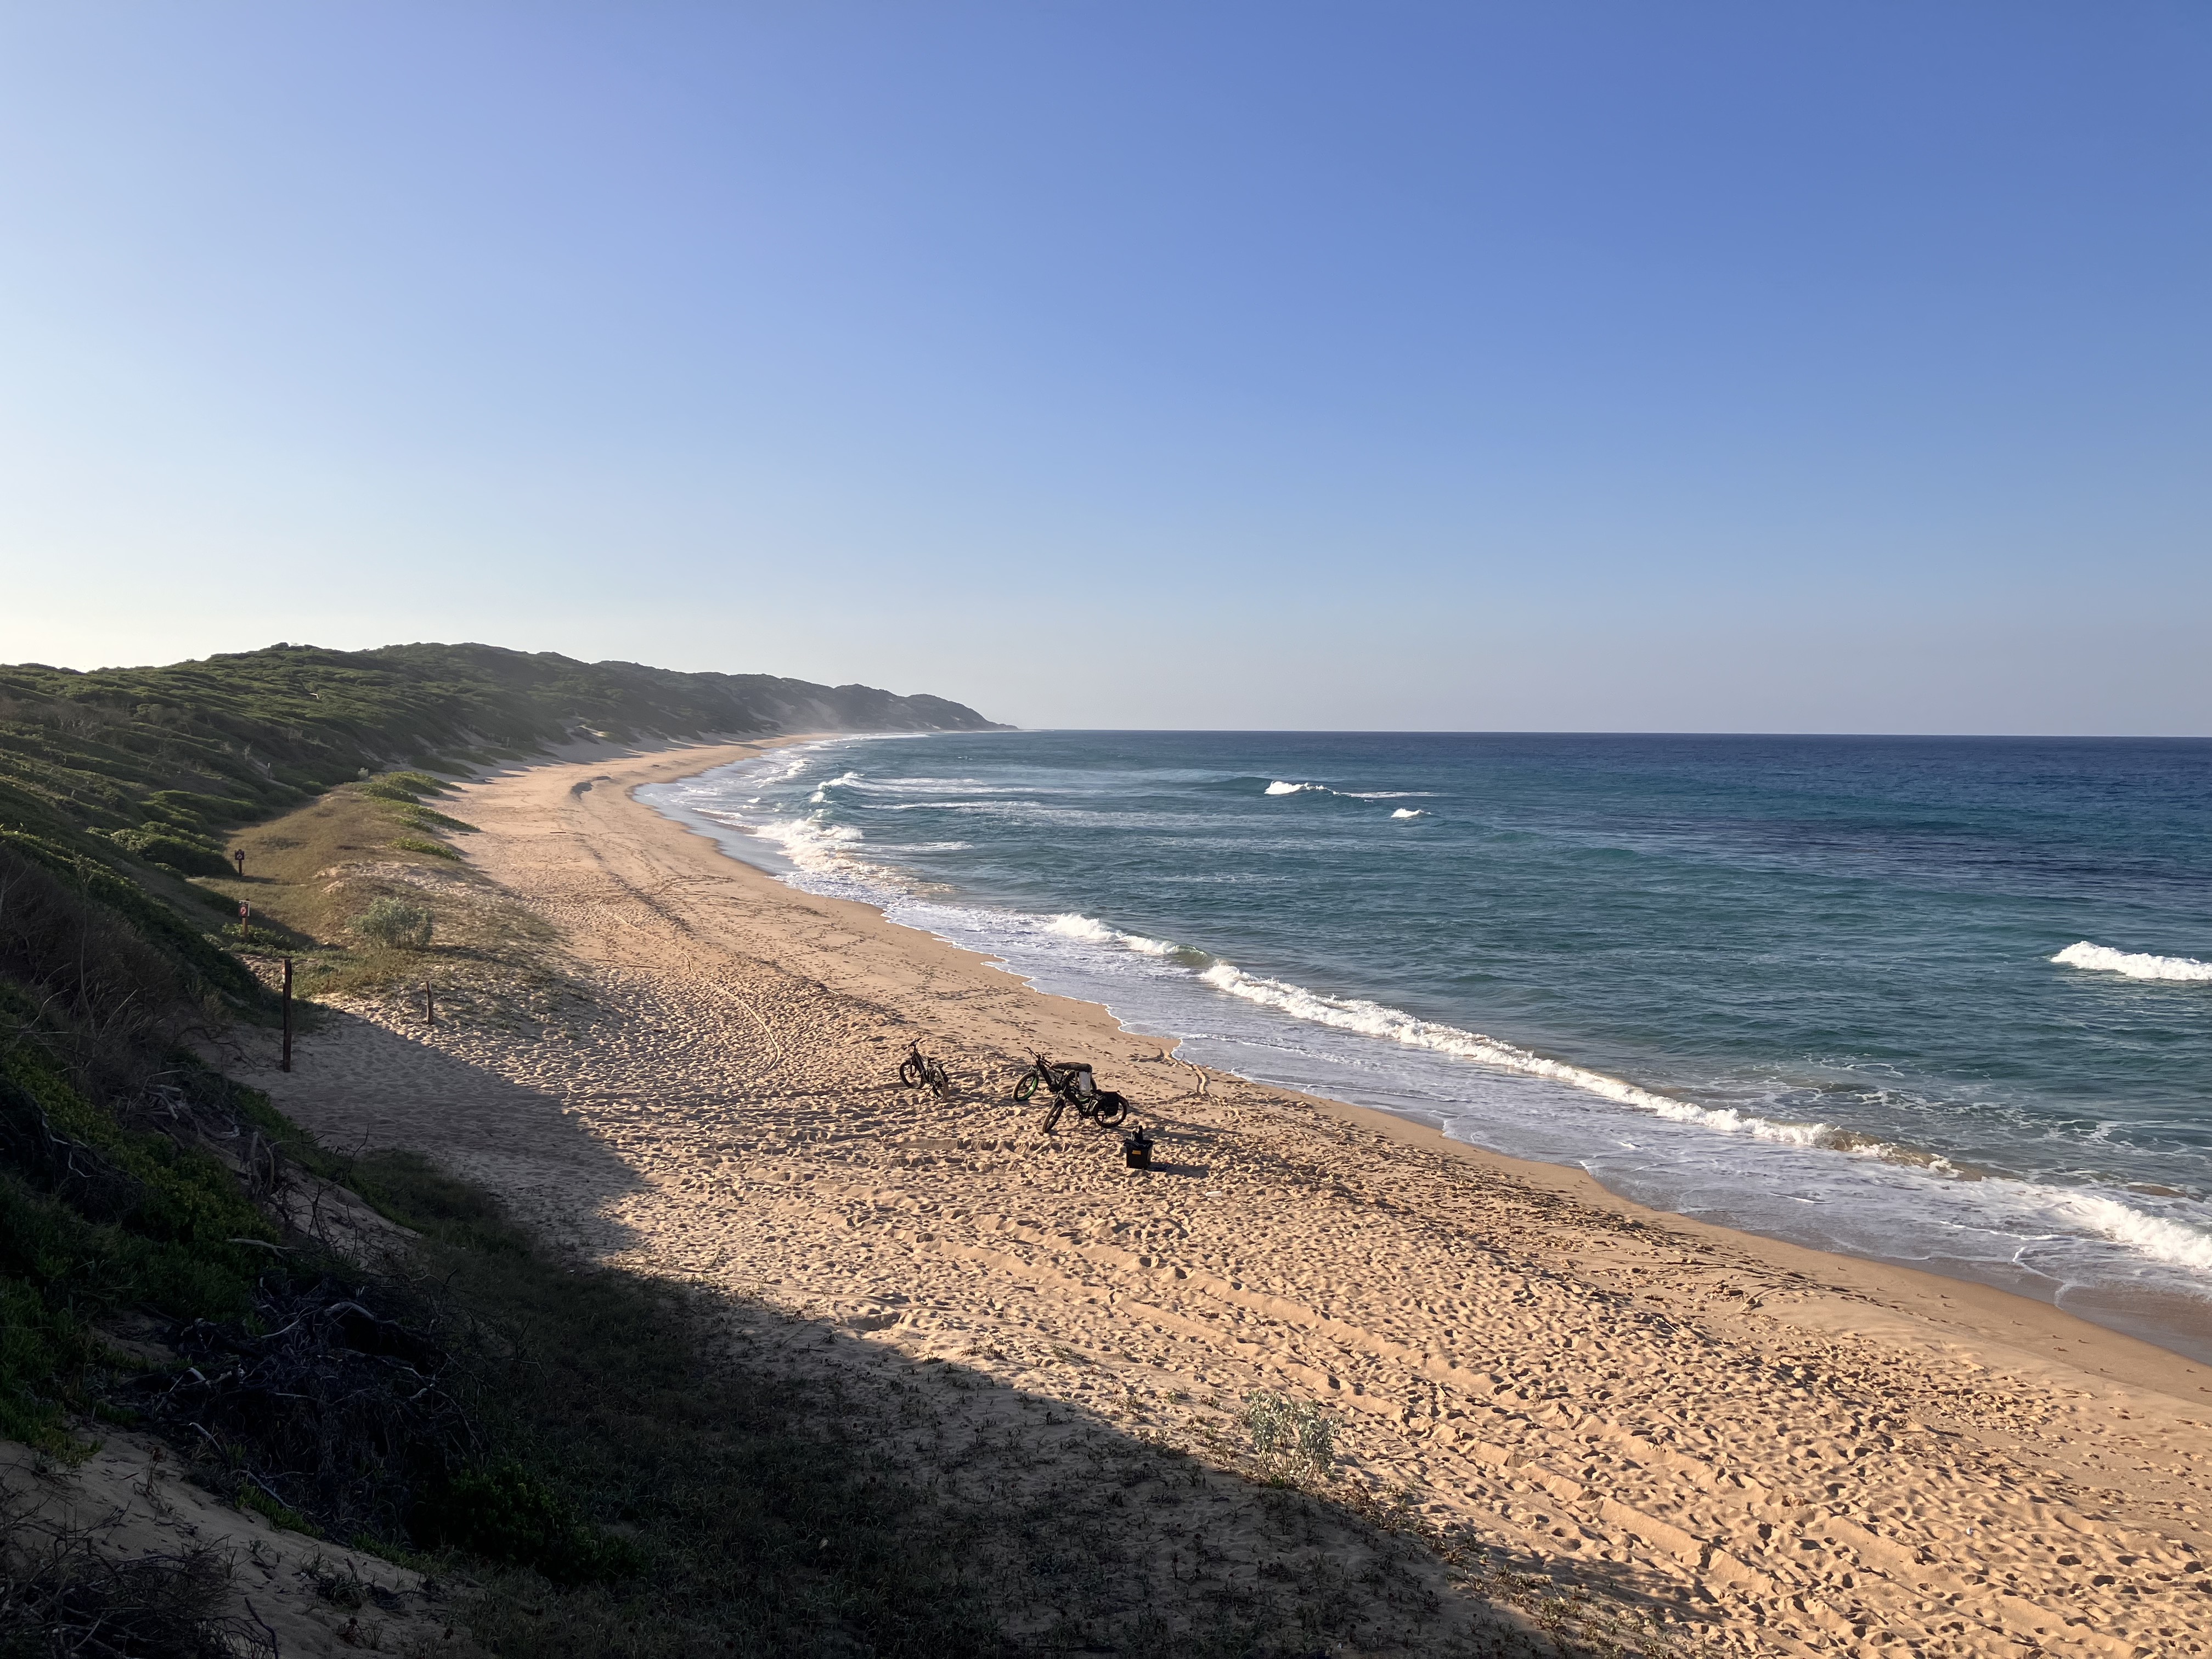 Looking north along the beach from Ponta Membene